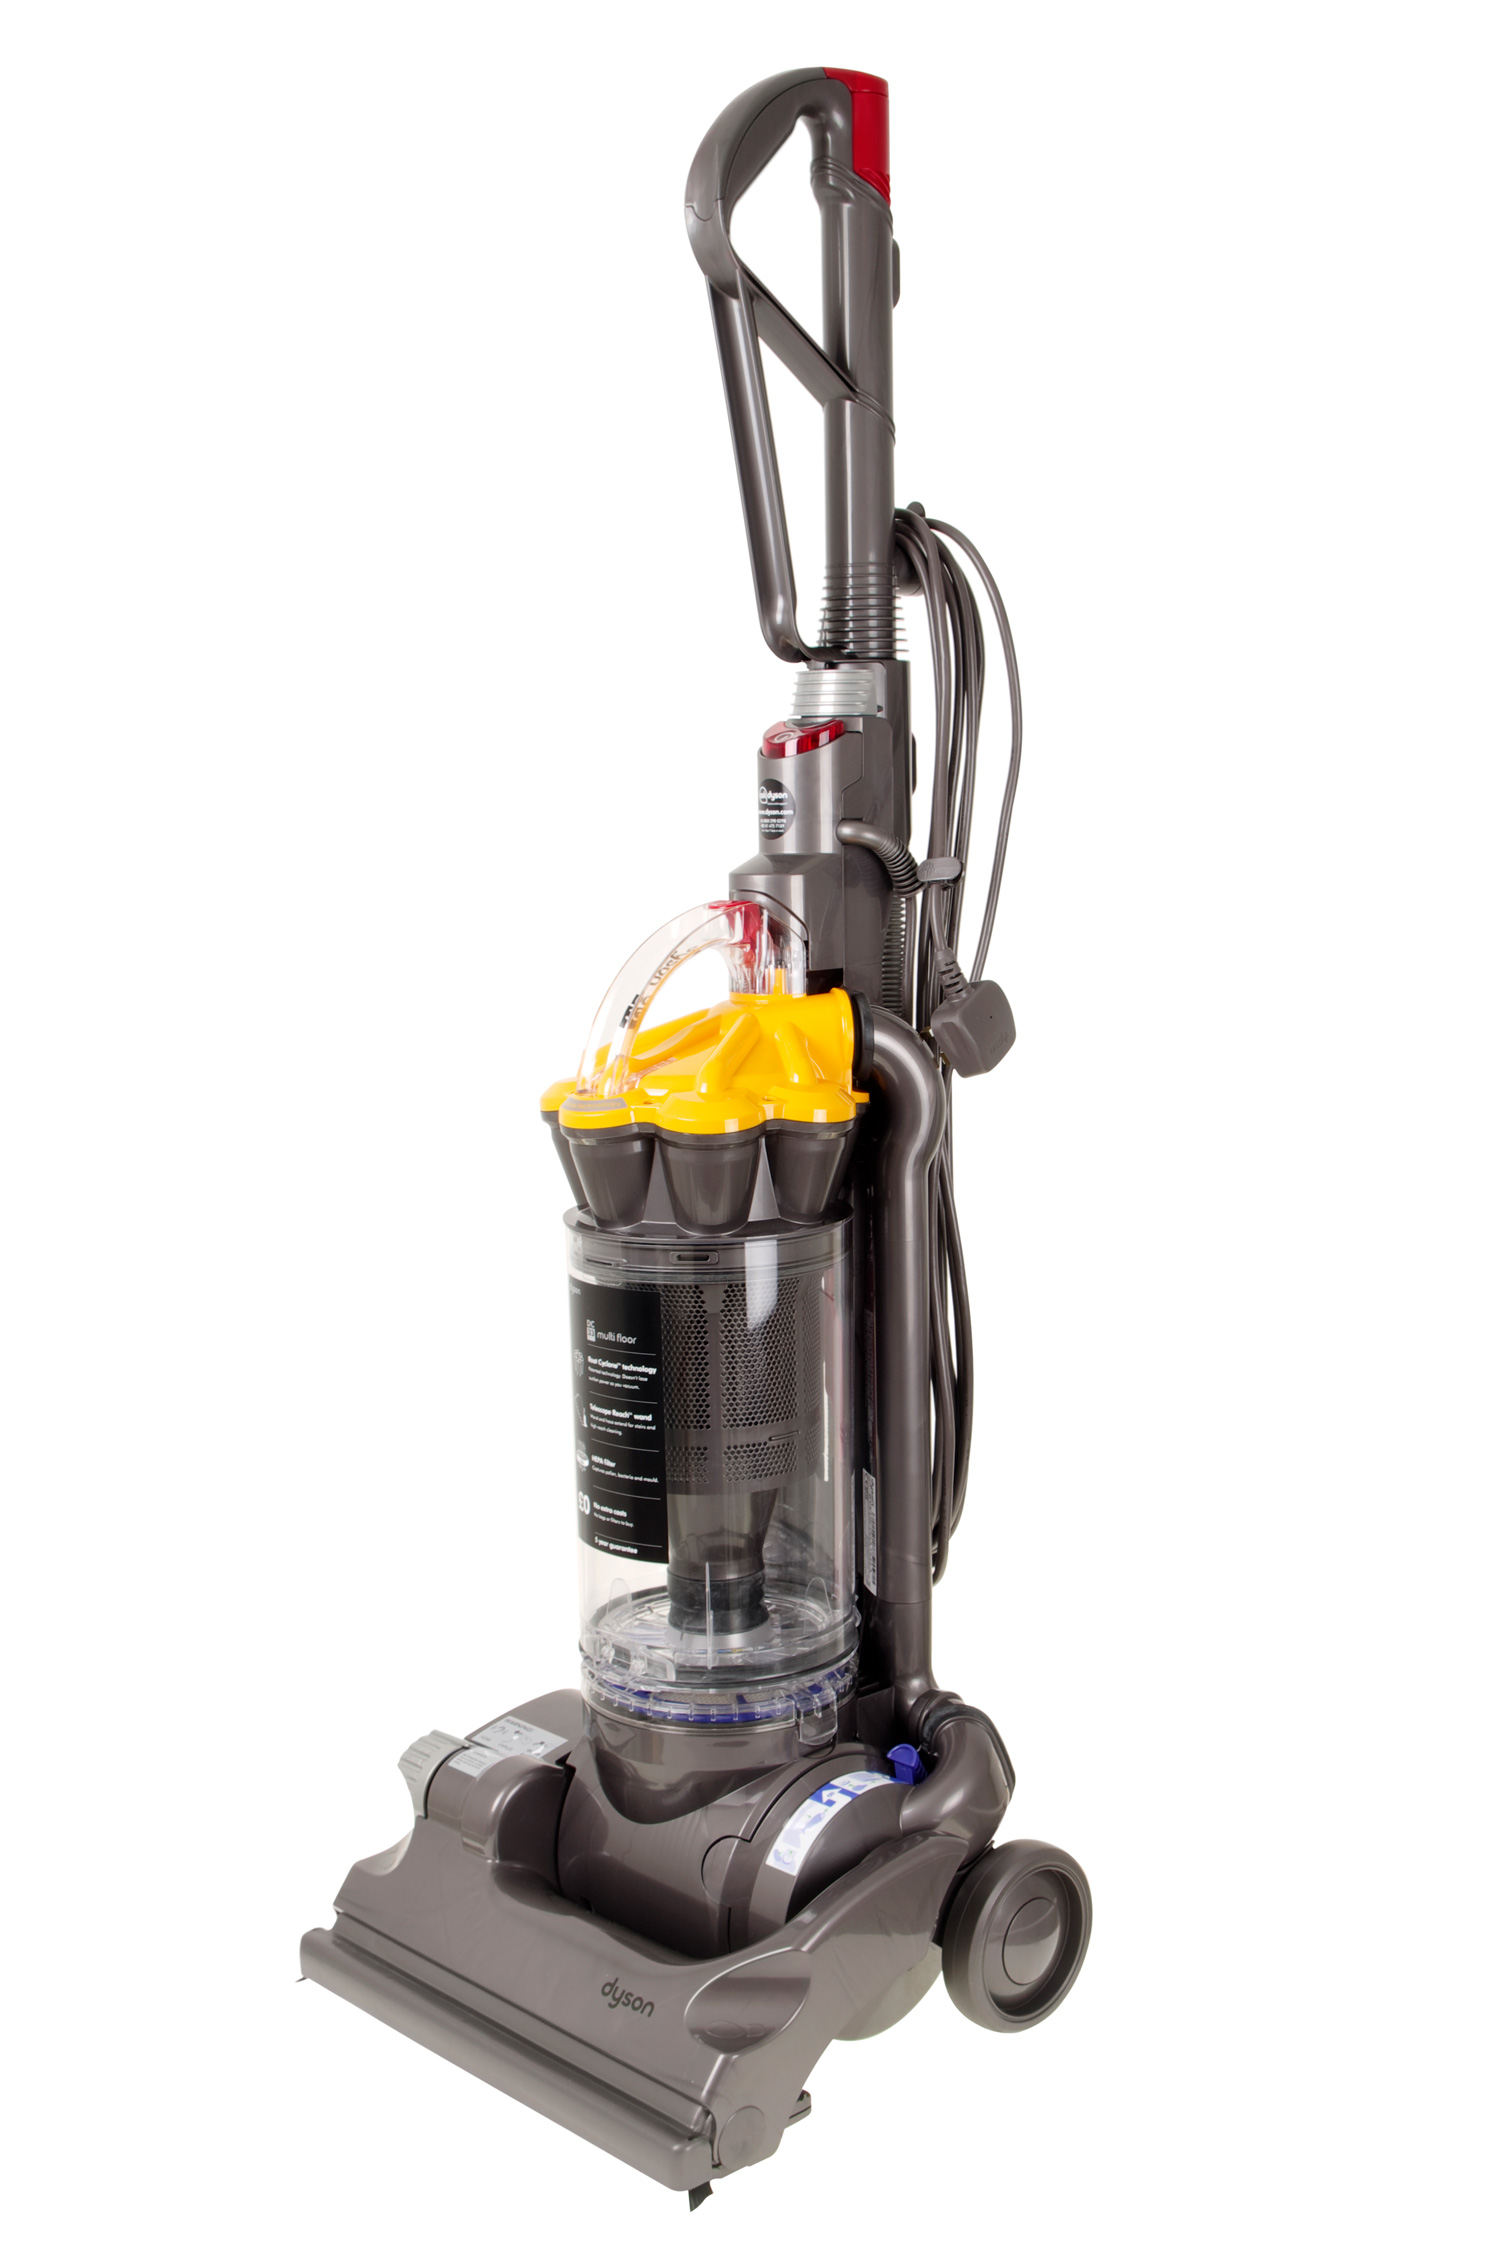 A Dyson DC33 bagless upright vacuum cleaner. This is the Multi Floor version denoted by the yellow top.